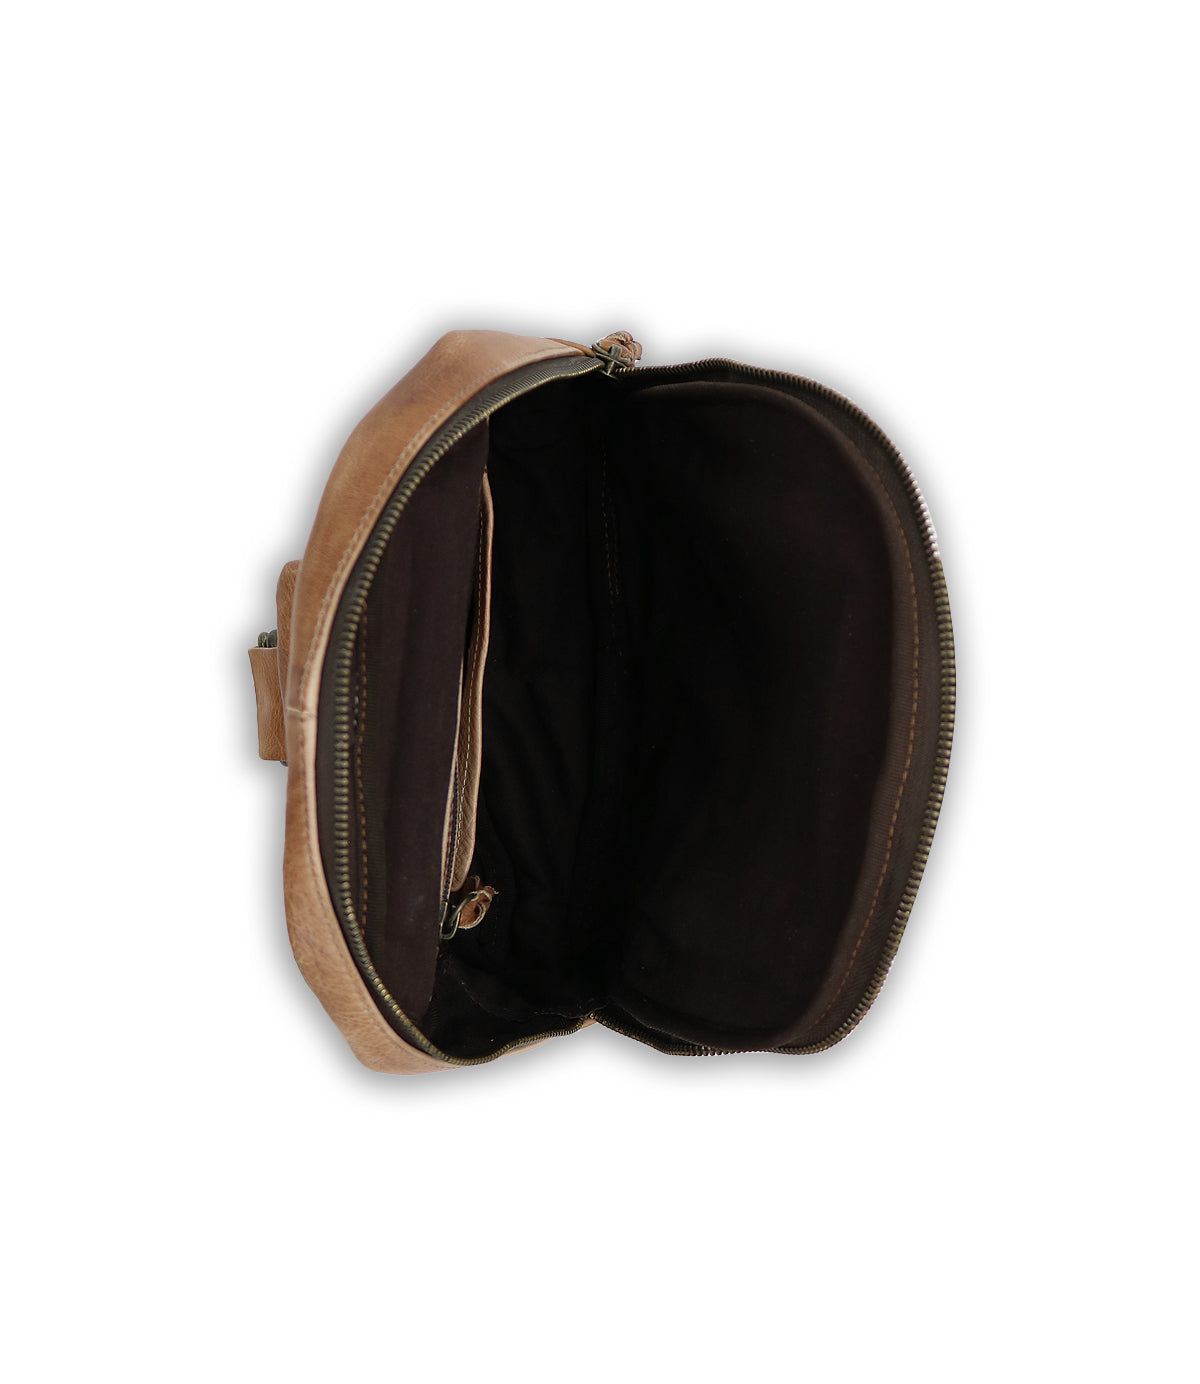 The inside of a Beau bag with a zipper, from the brand Bed Stu.